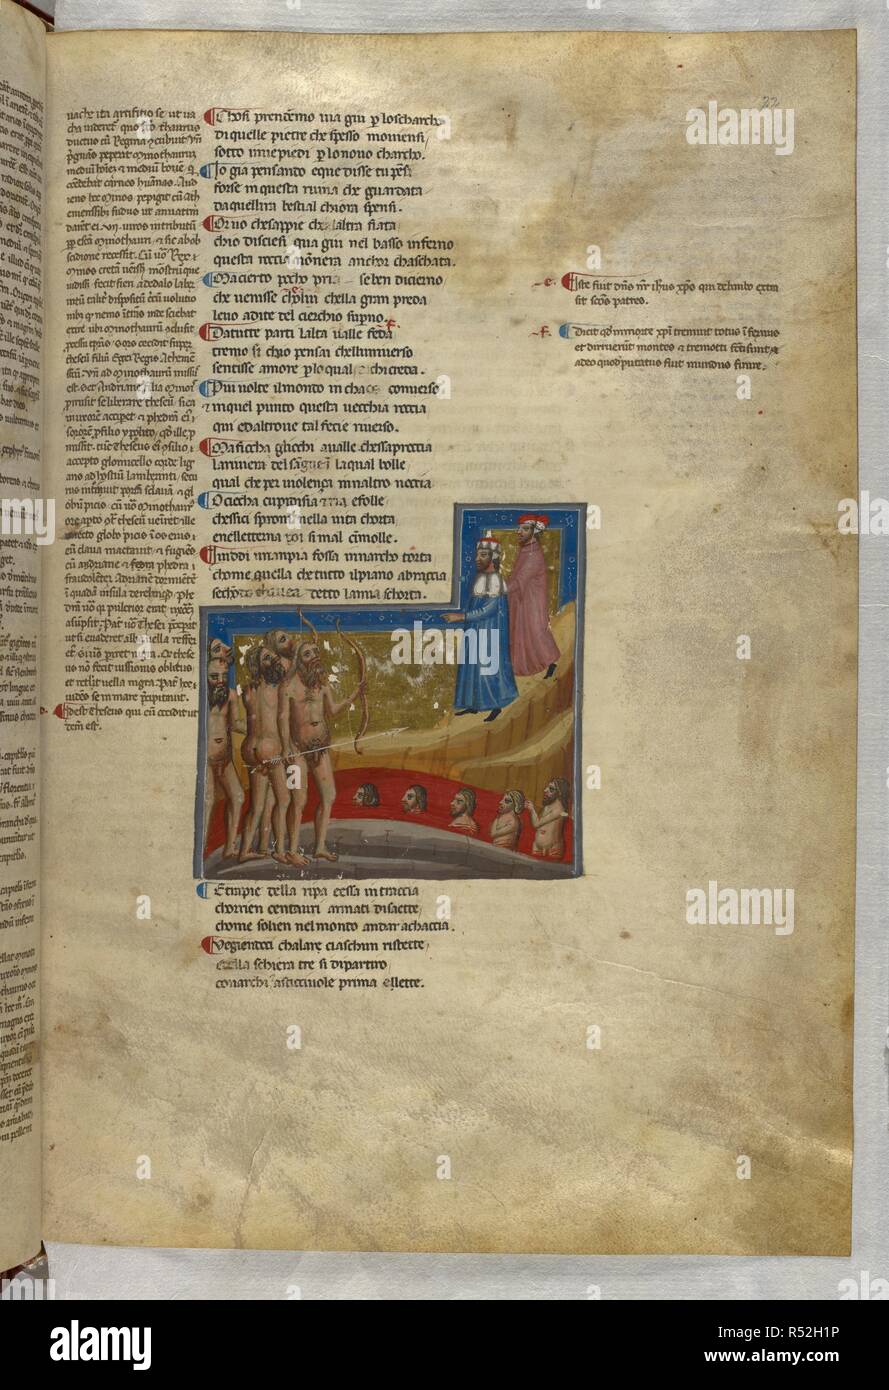 Inferno: Centaurs beside the river of blood. Dante Alighieri, Divina Commedia ( The Divine Comedy ), with a commentary in Latin. 1st half of the 14th century. Source: Egerton 943, f.22. Language: Italian, Latin. Stock Photo